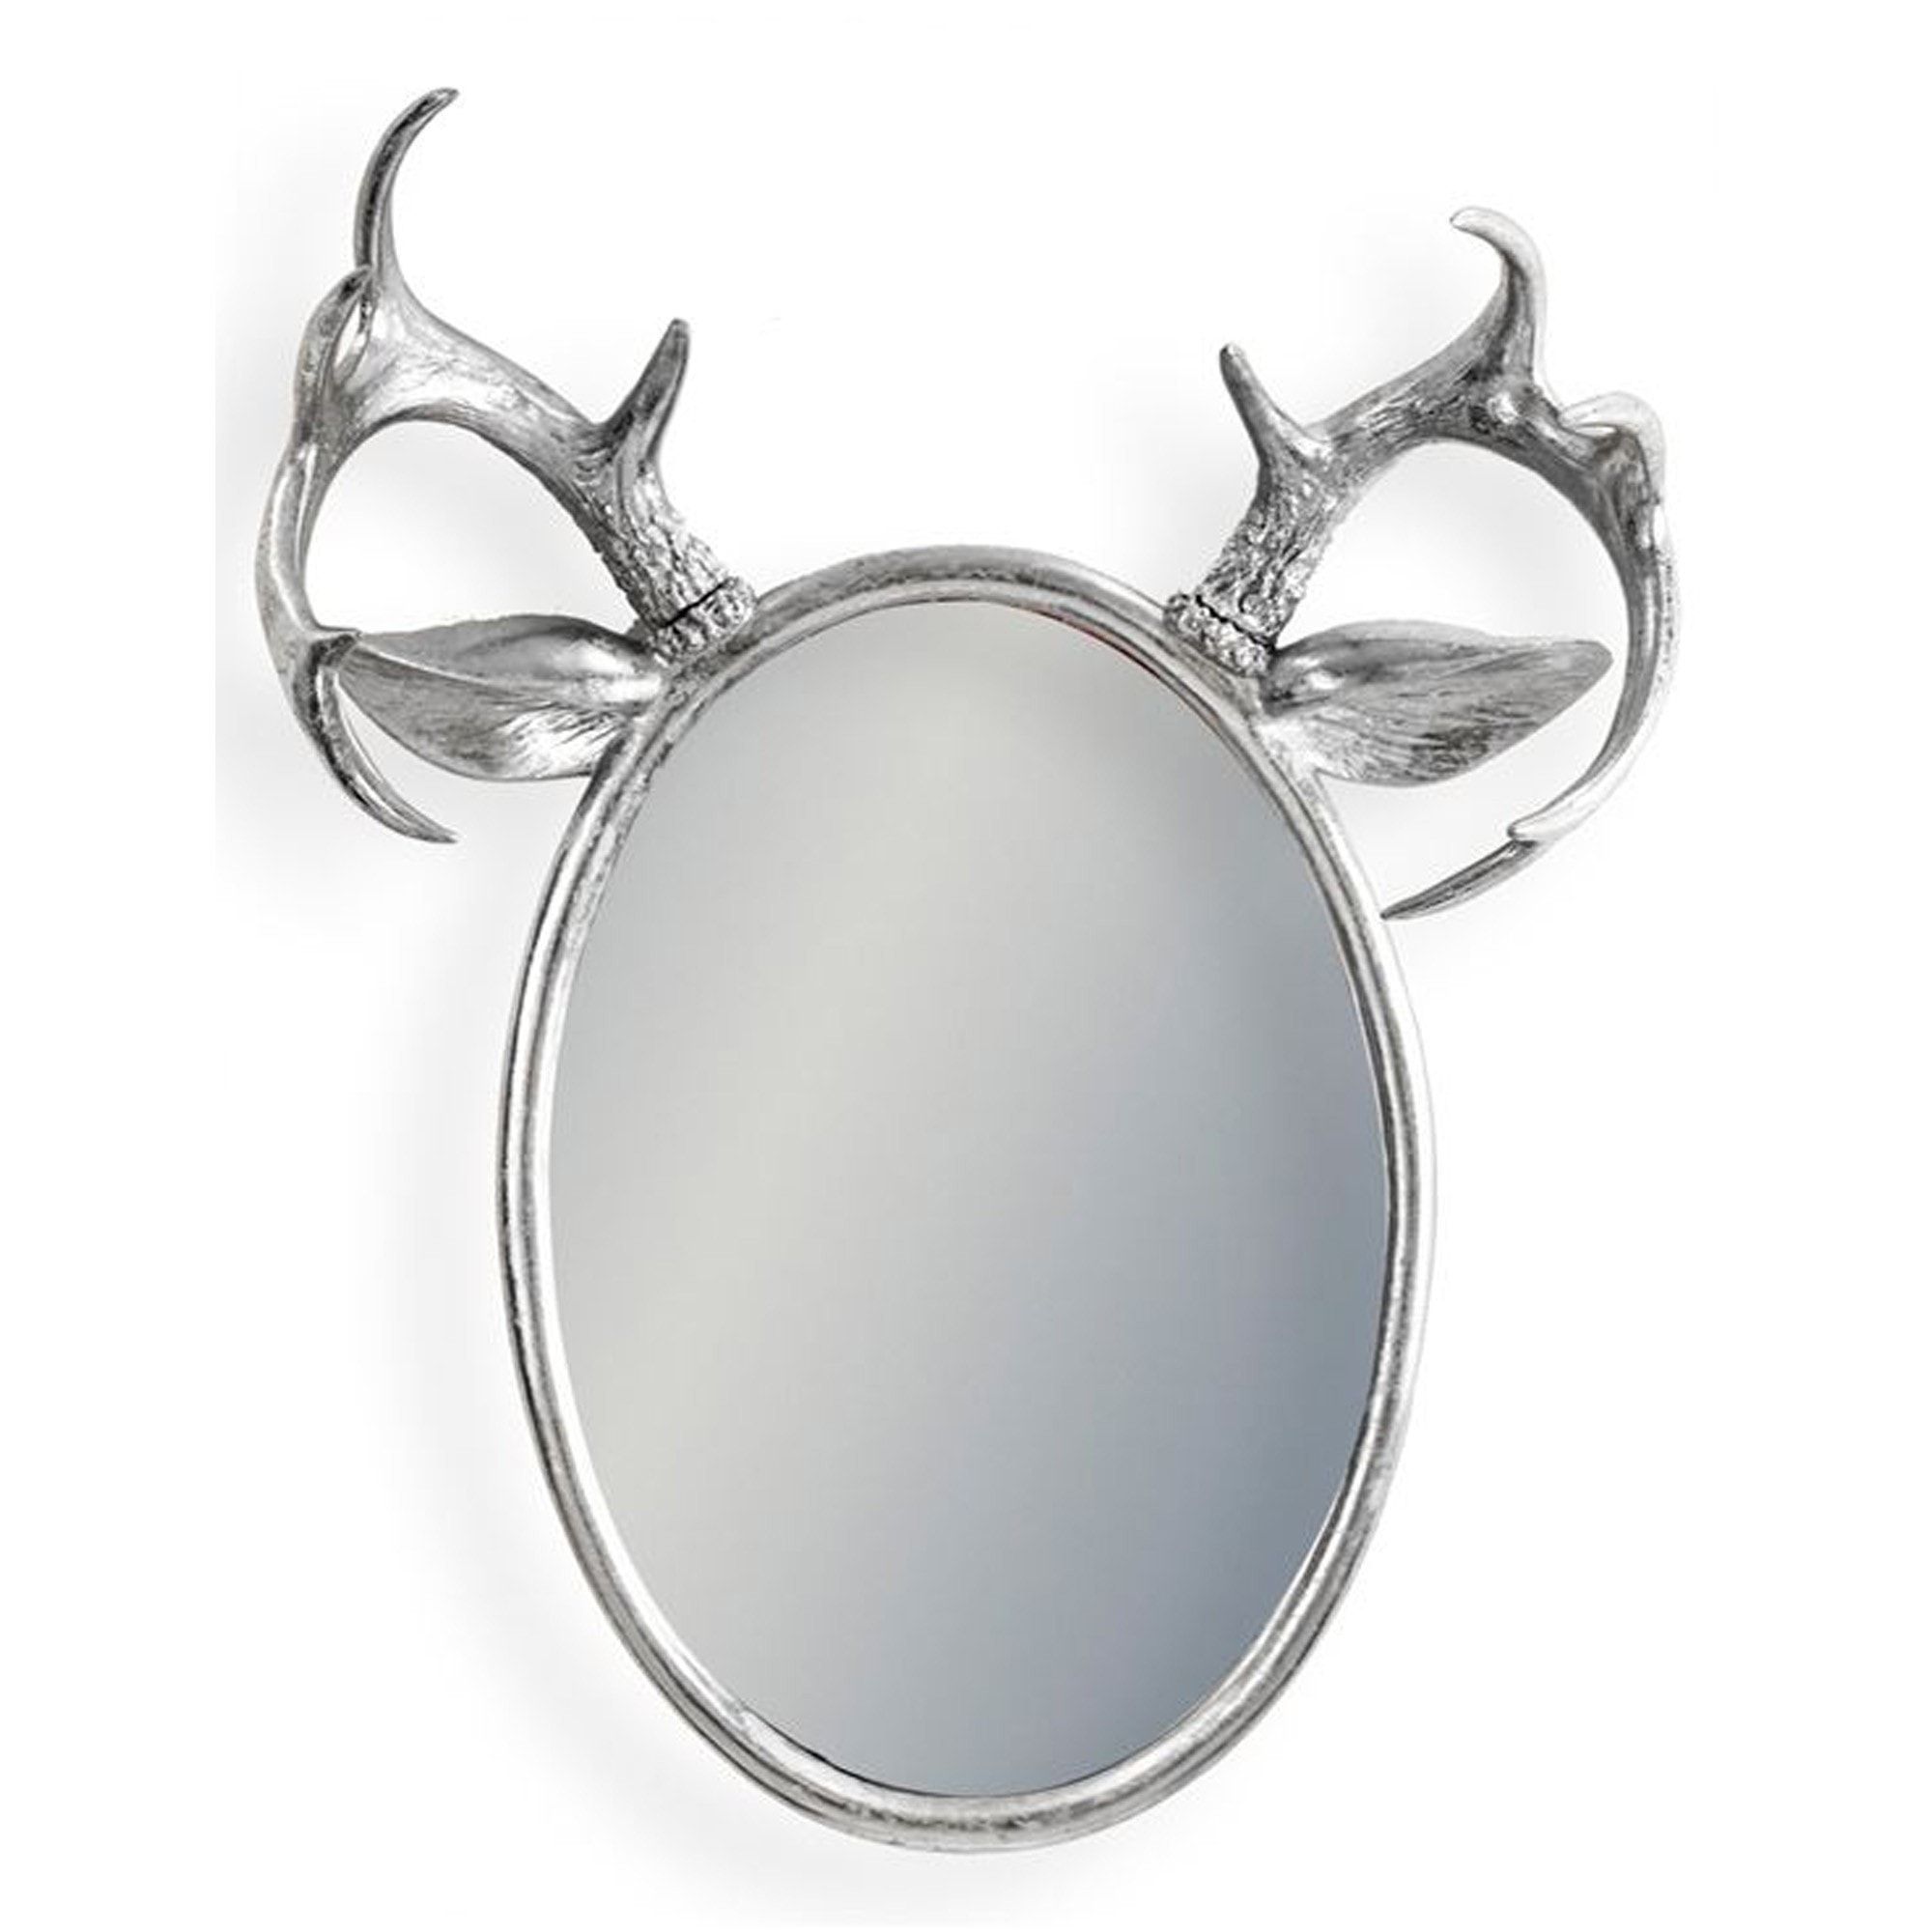 Silver Leaf Oval Stag Horn Wall Mirror | Wall Mirror | Oval Mirror Throughout Silver Oval Wall Mirrors (View 13 of 15)